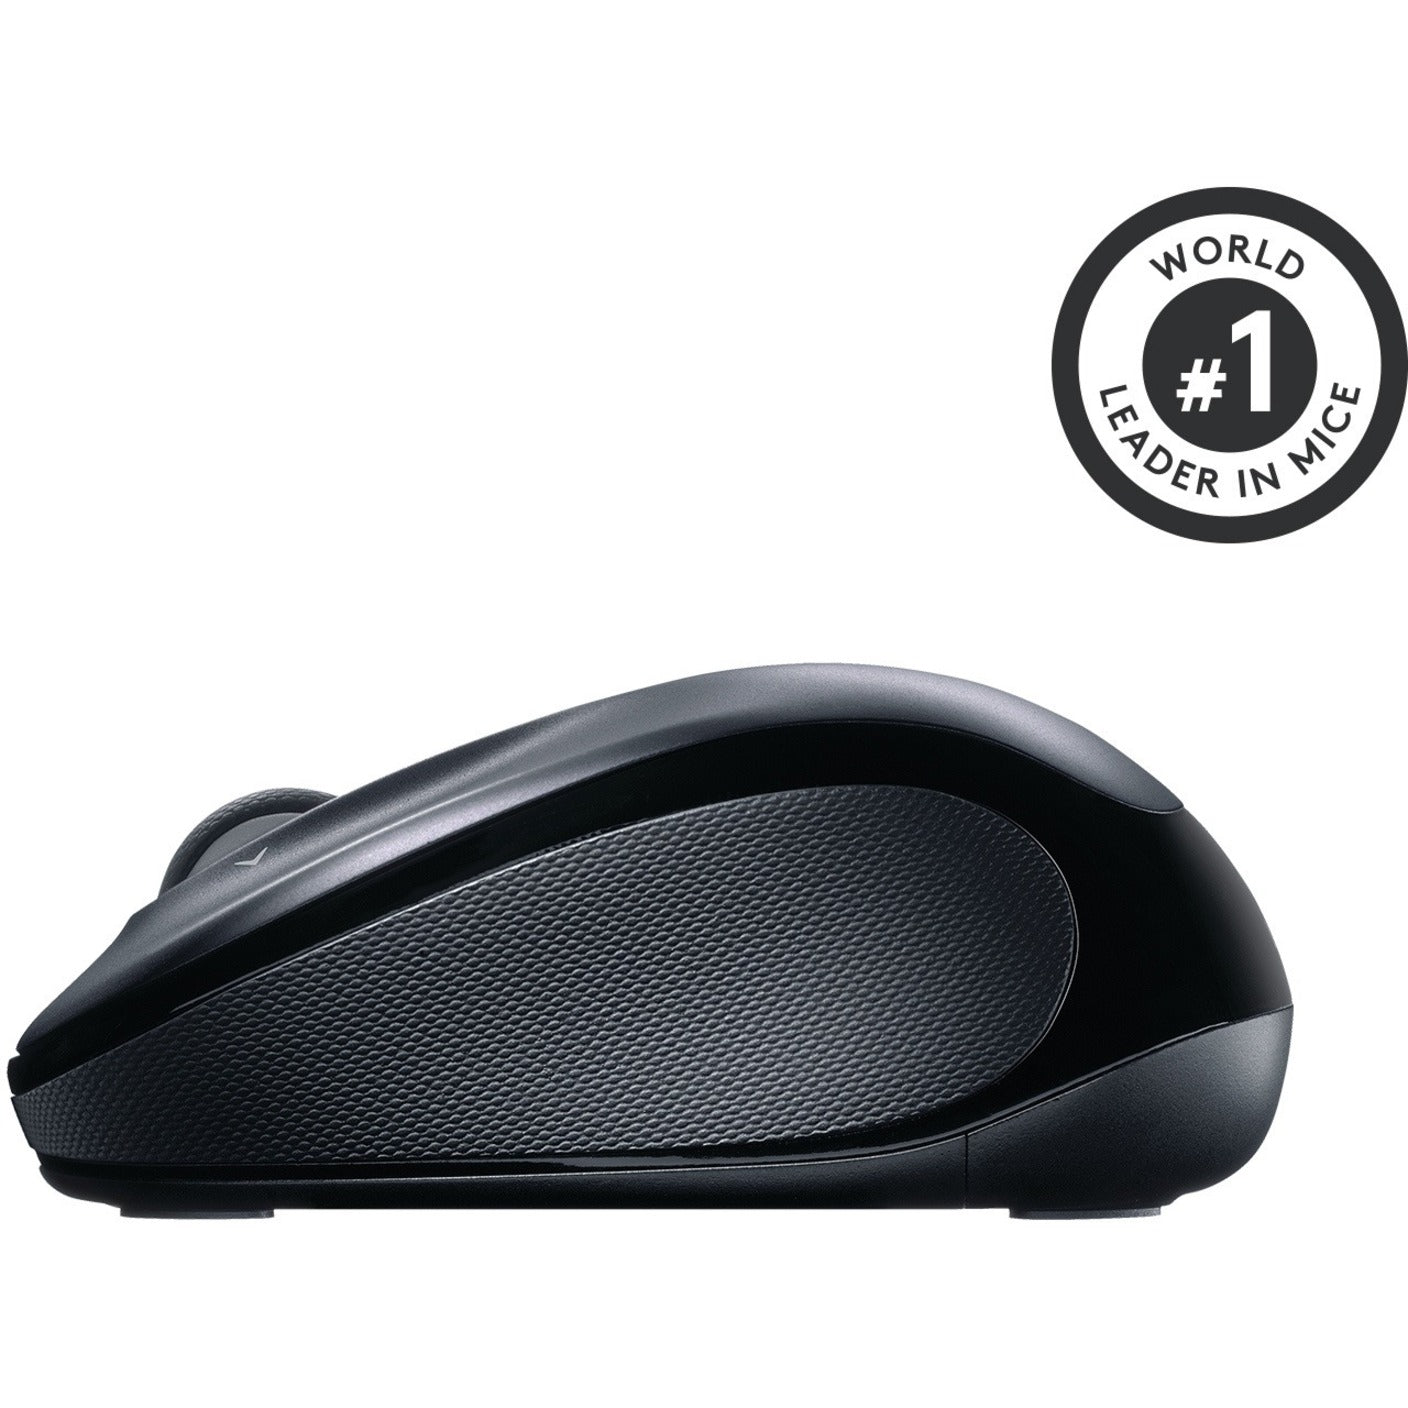 Logitech 910002136 M325 Mouse, Wireless Dark Silver Optical Mouse with Rubber Grip, Battery Indicator, and Contour